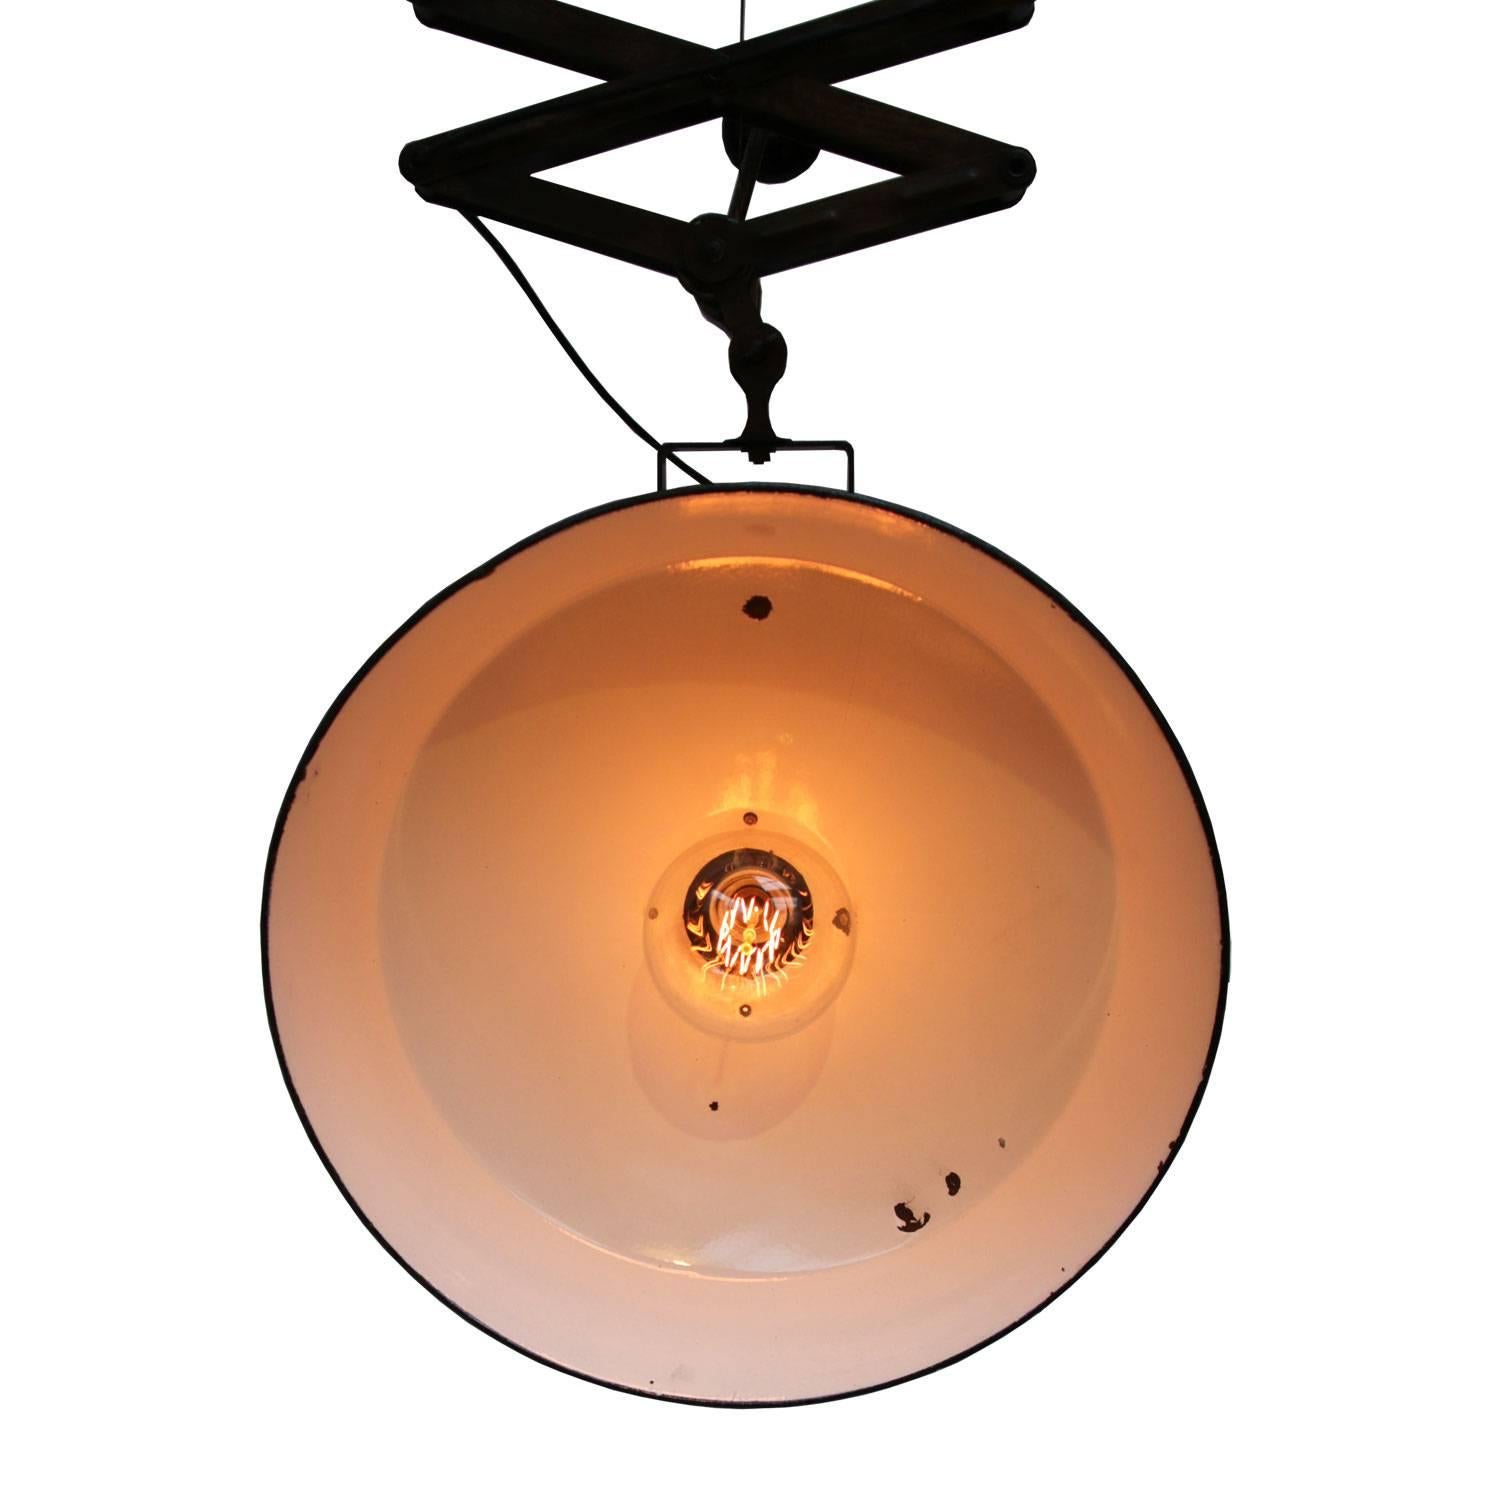 Scissor spring with industrial hanging lamp.
Design: Black enamel. White interior.
Diam. shade 52 cm. Max length 250 cm. Weight 7.0 kg.

Weight: 7.0 kg / 15.4 lb

Priced per individual item. All lamps have been made suitable by international